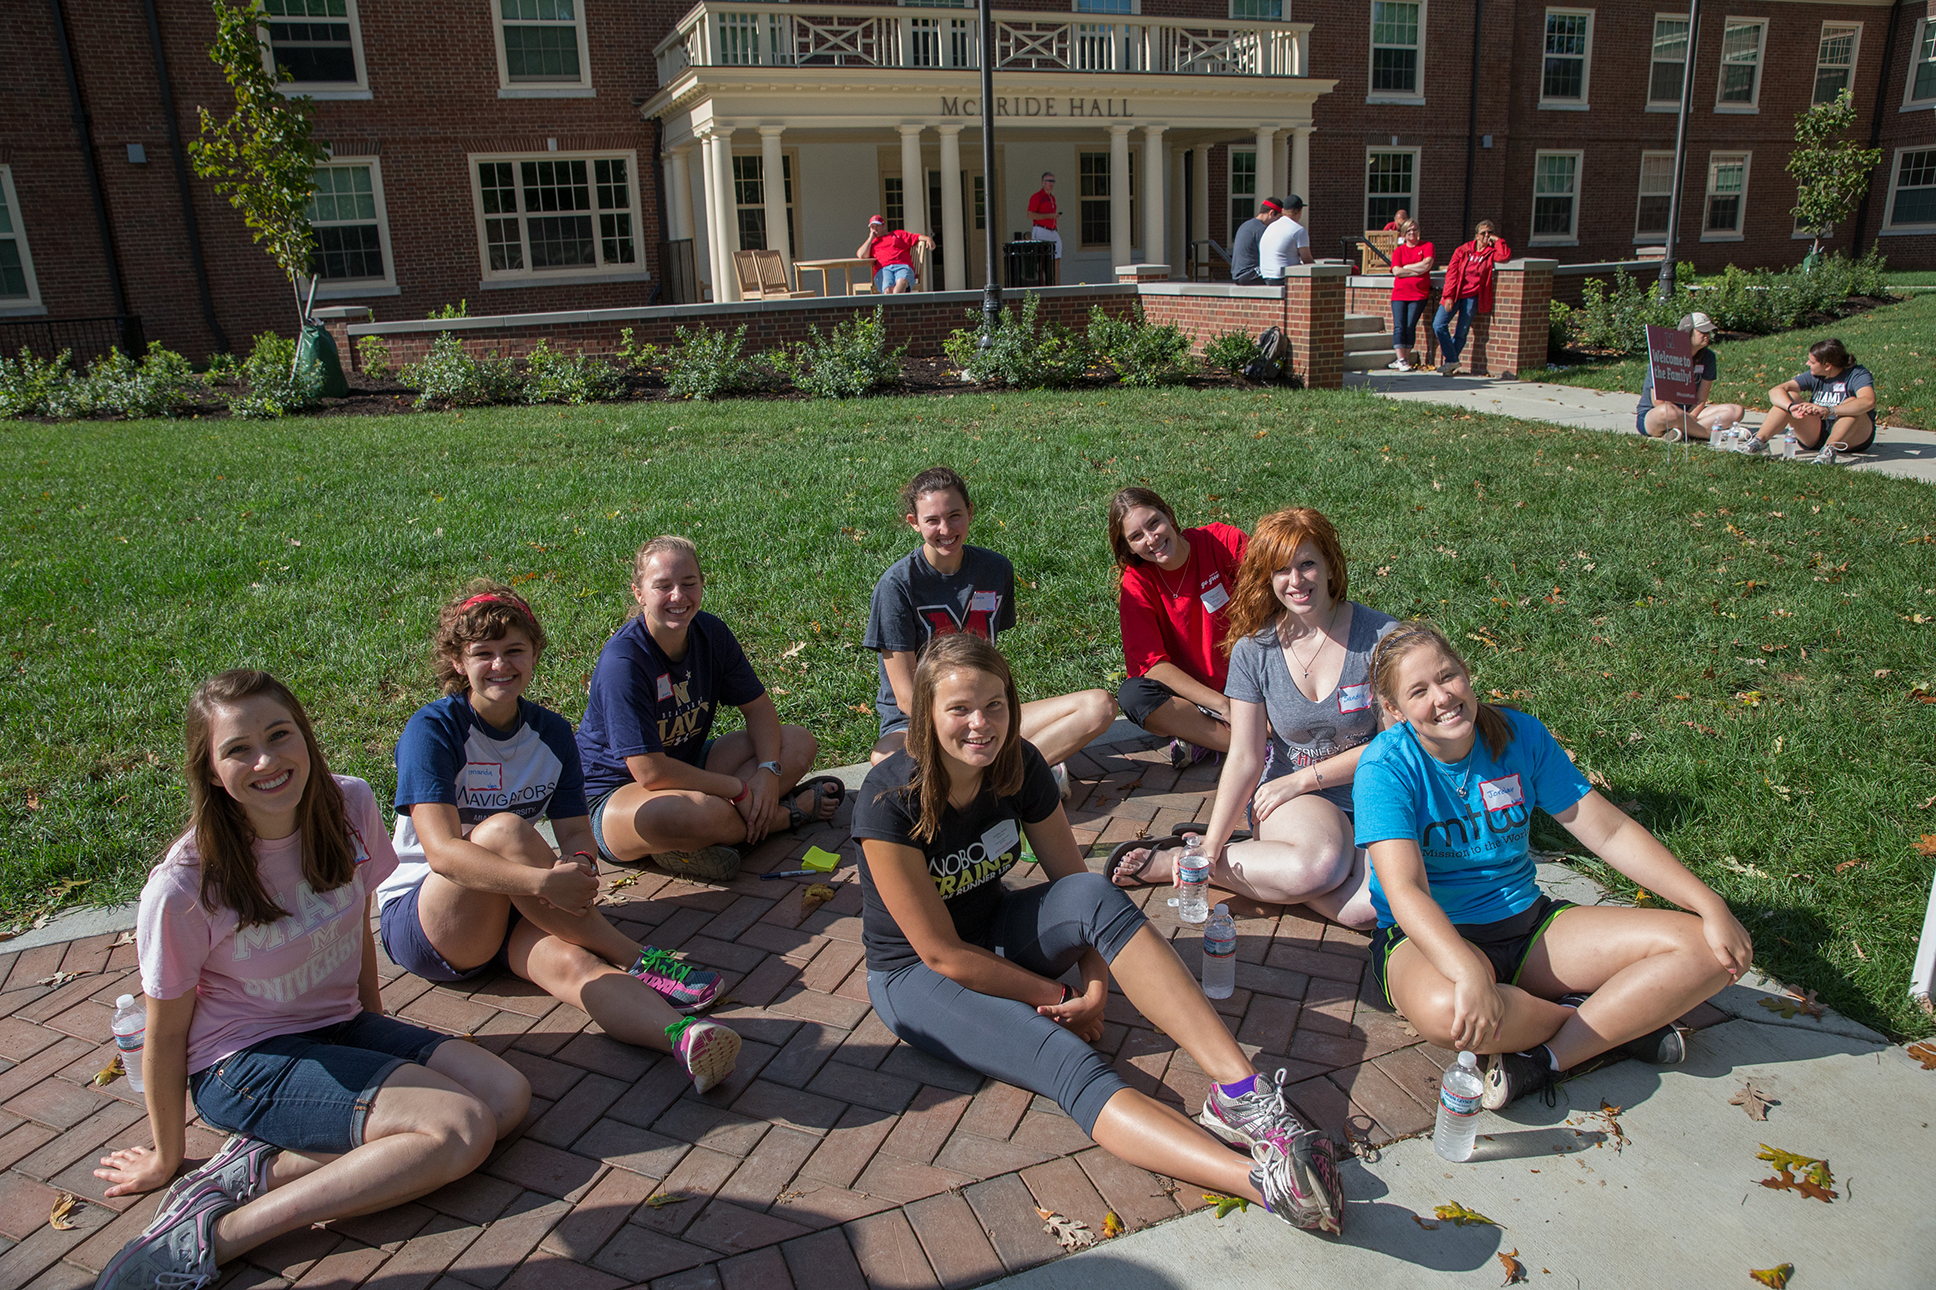 A group of student volunteers take a break, sitting on the ground